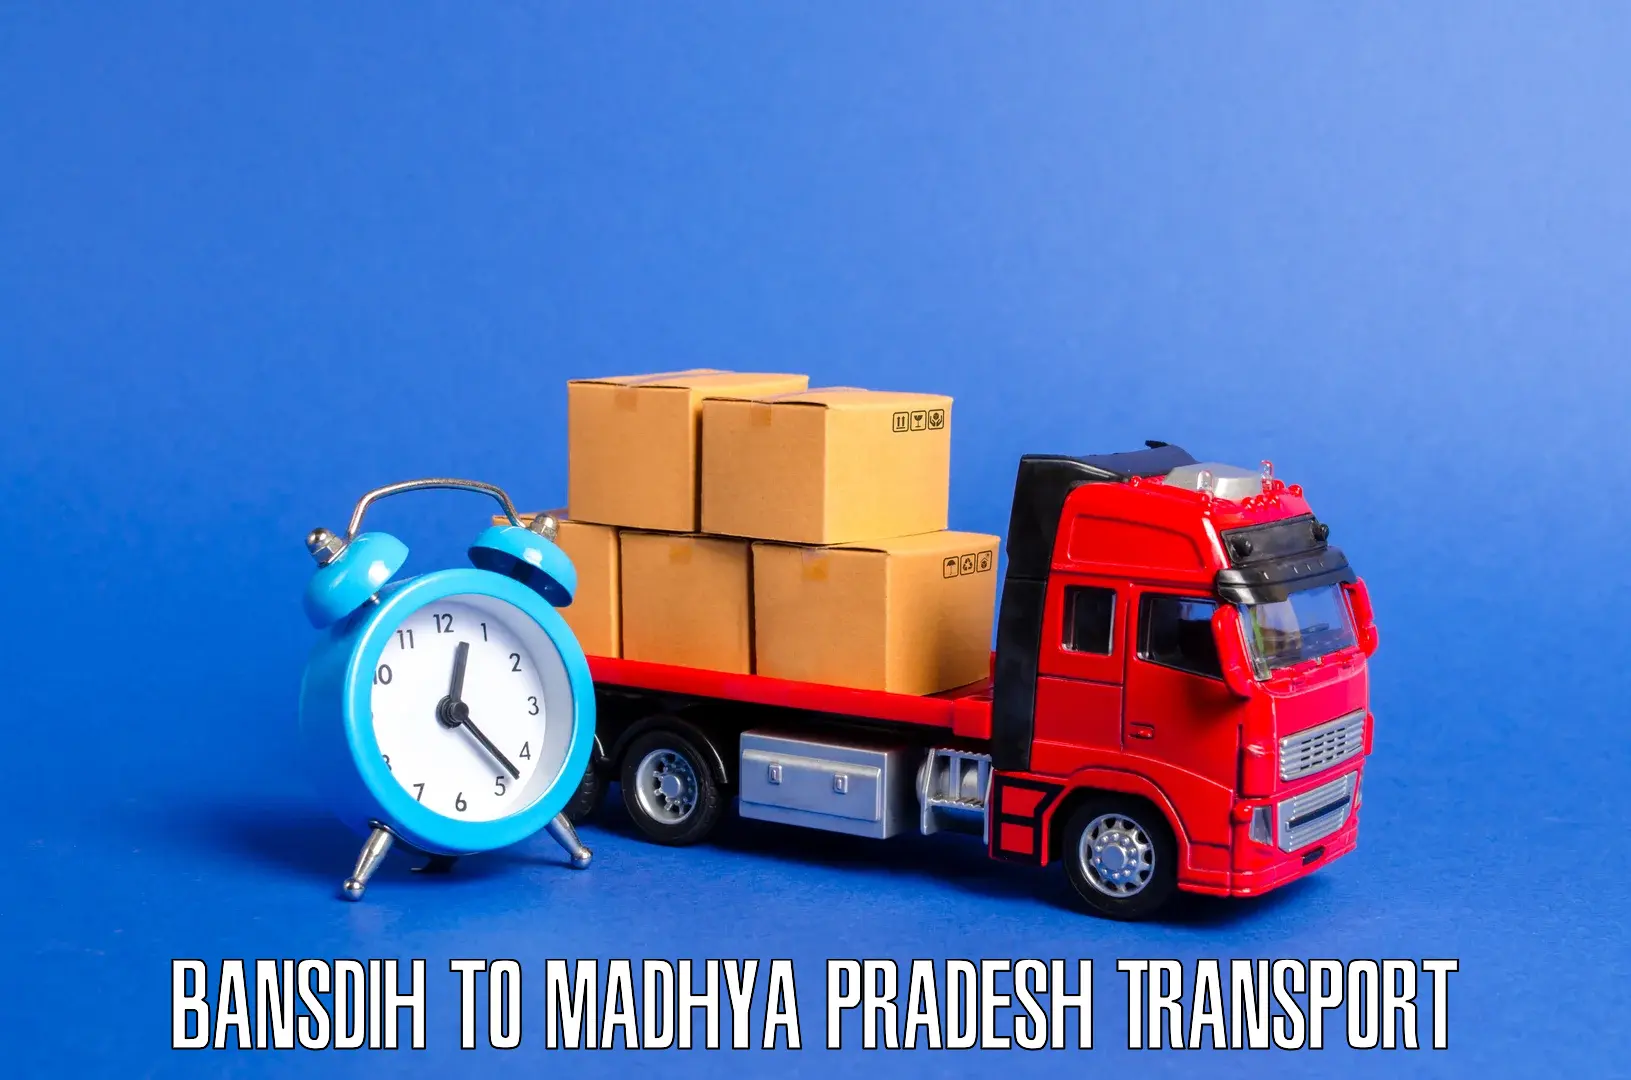 Truck transport companies in India Bansdih to Sausar